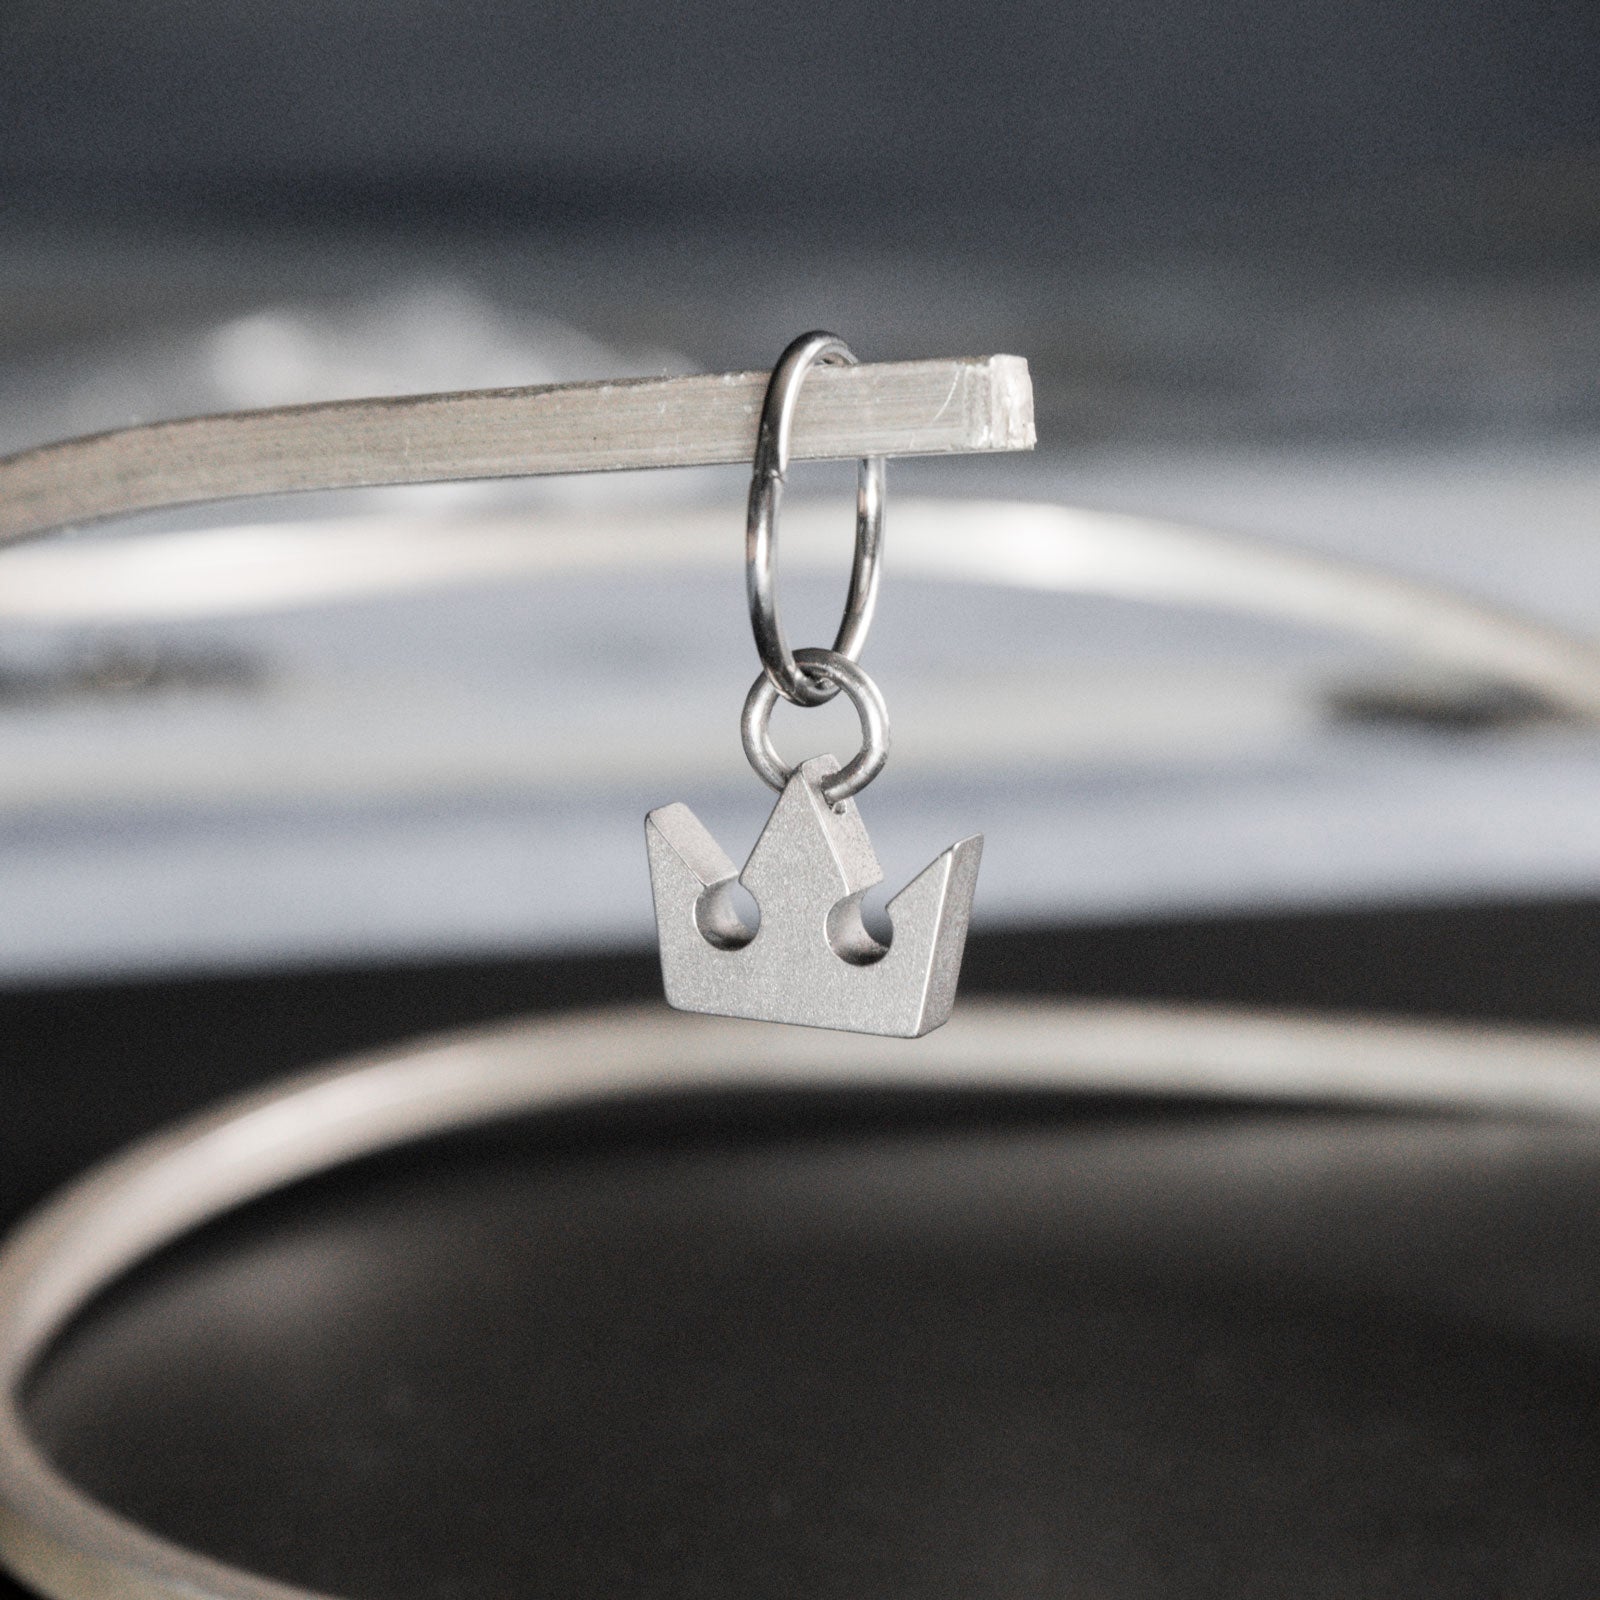 Sora's crown as an earring, perfectly recreated with faithful proportions. Although it is immediately reminiscent of Sora, the crown is a seemingly simple, minimalist and timeless piece to wear. Entirely handcrafted from grade 5 titanium.